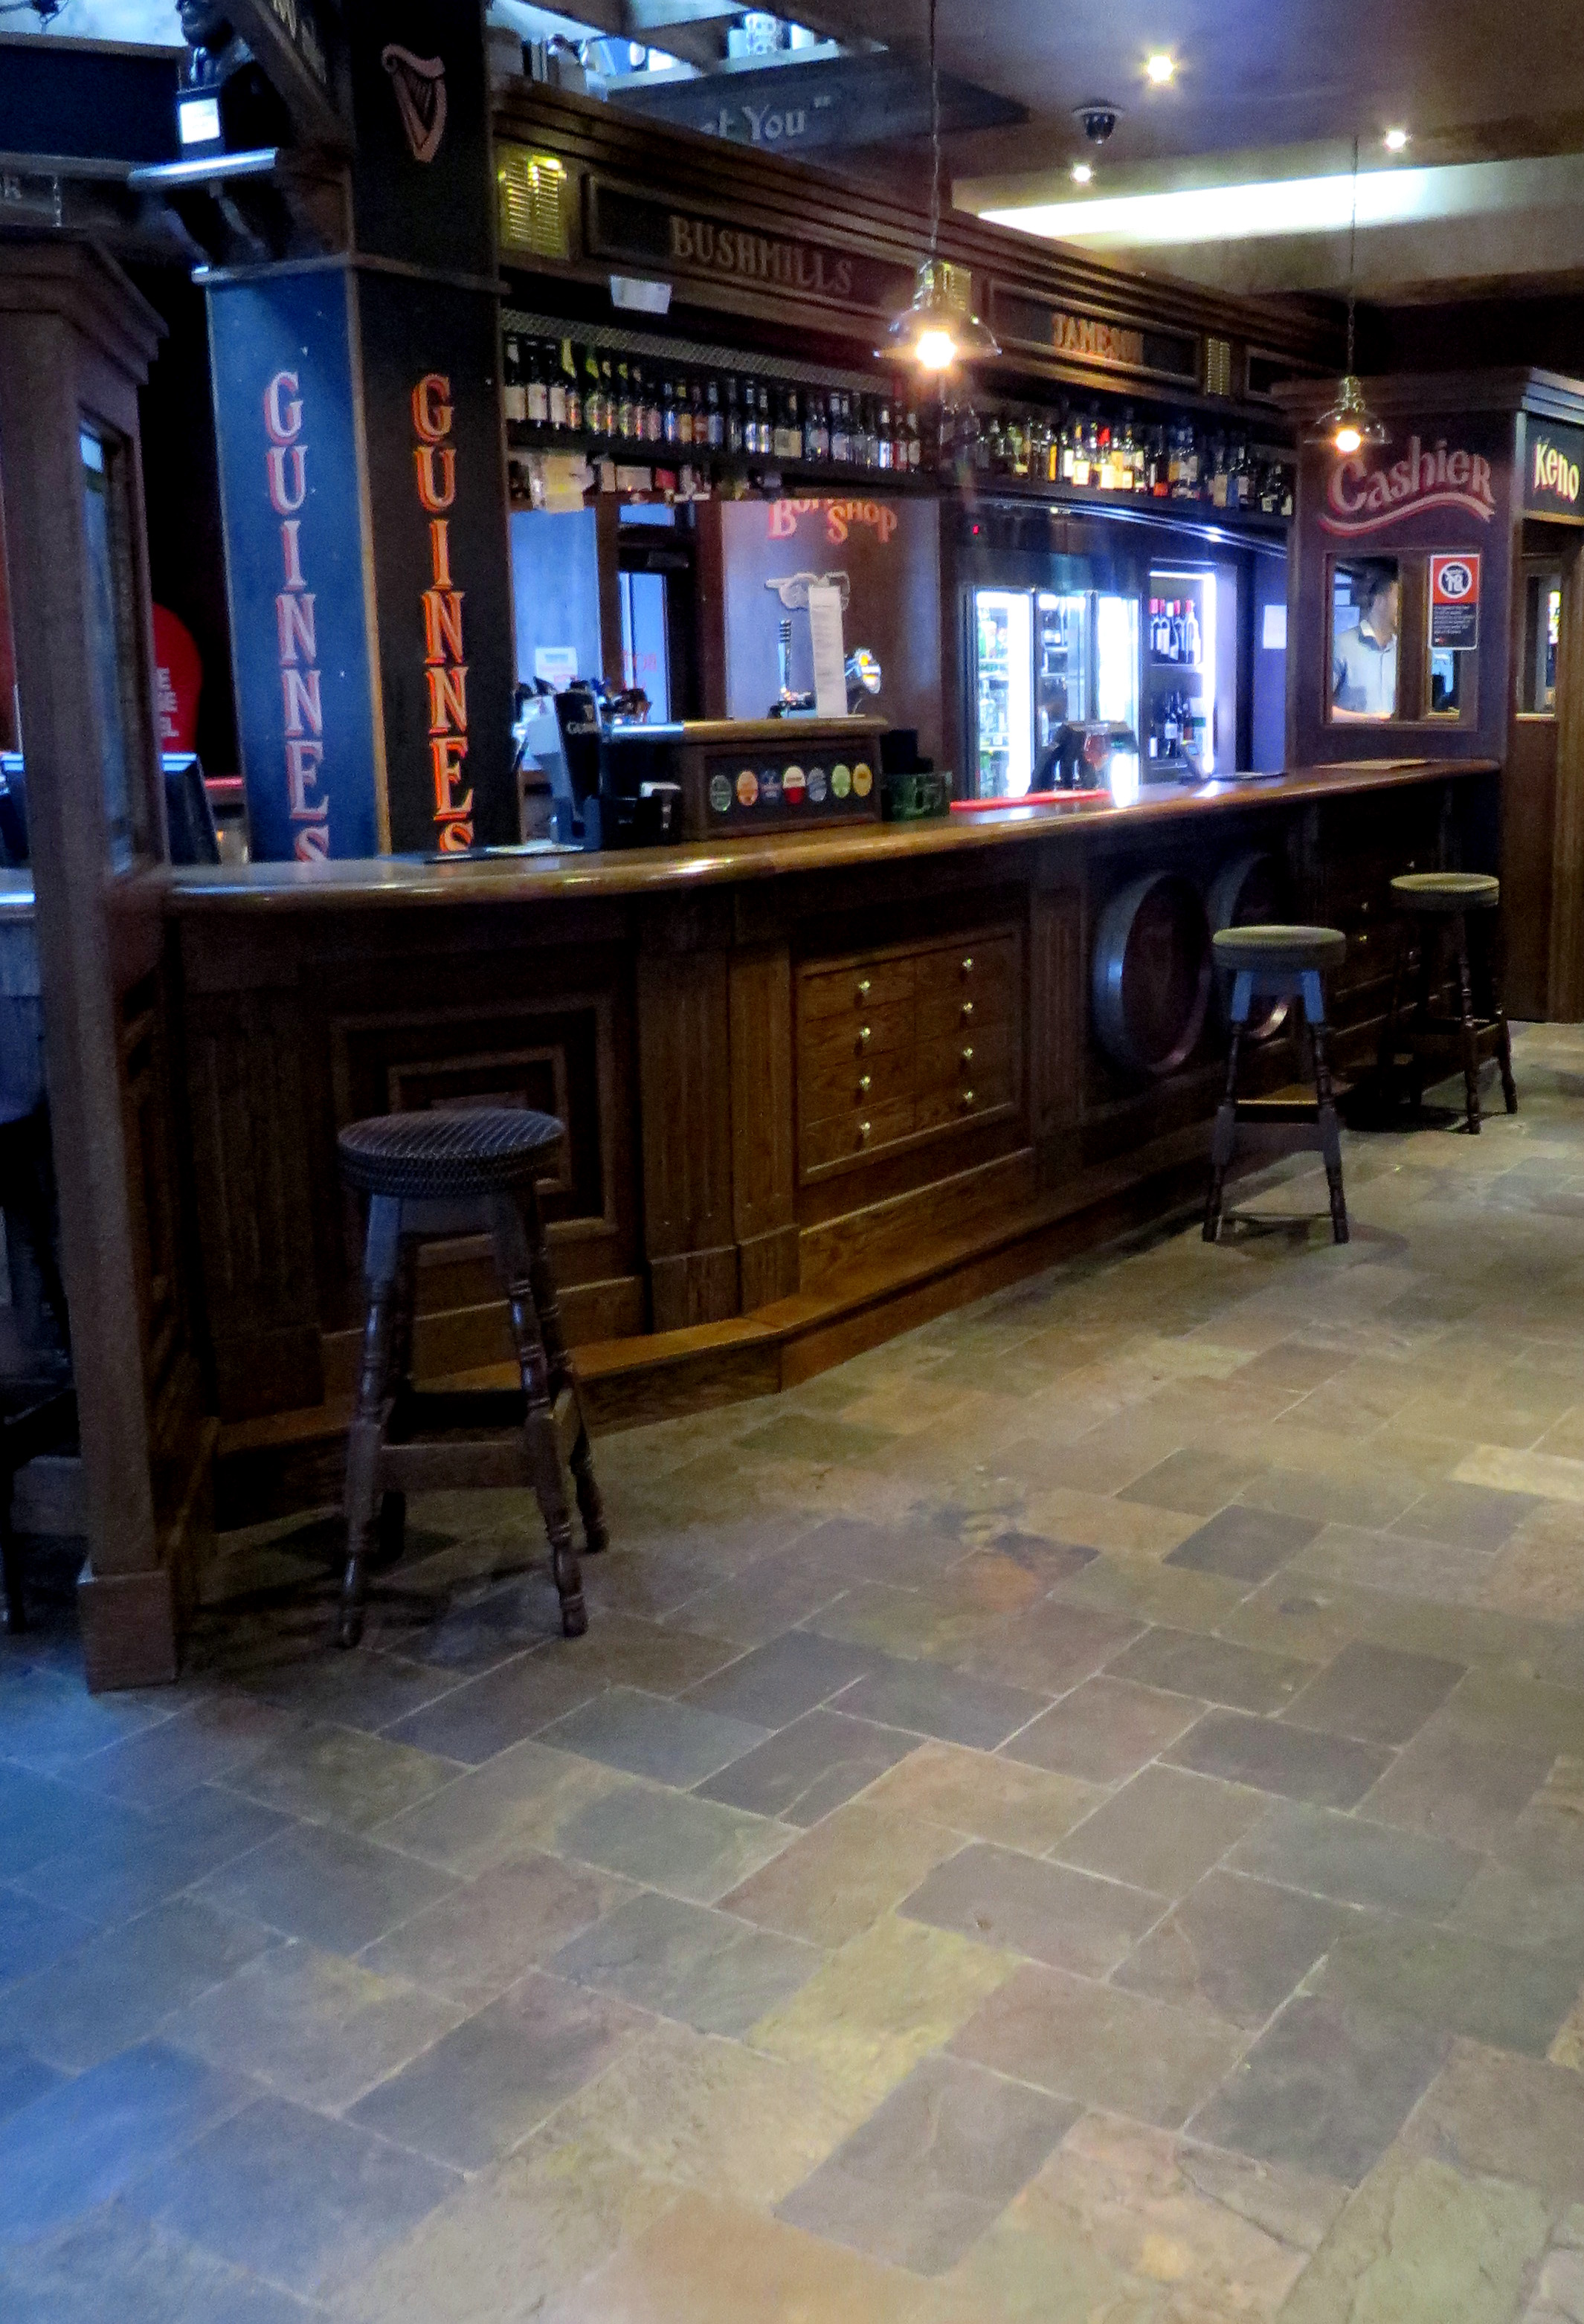 Unsealed Rajah slate on the floor of the bar